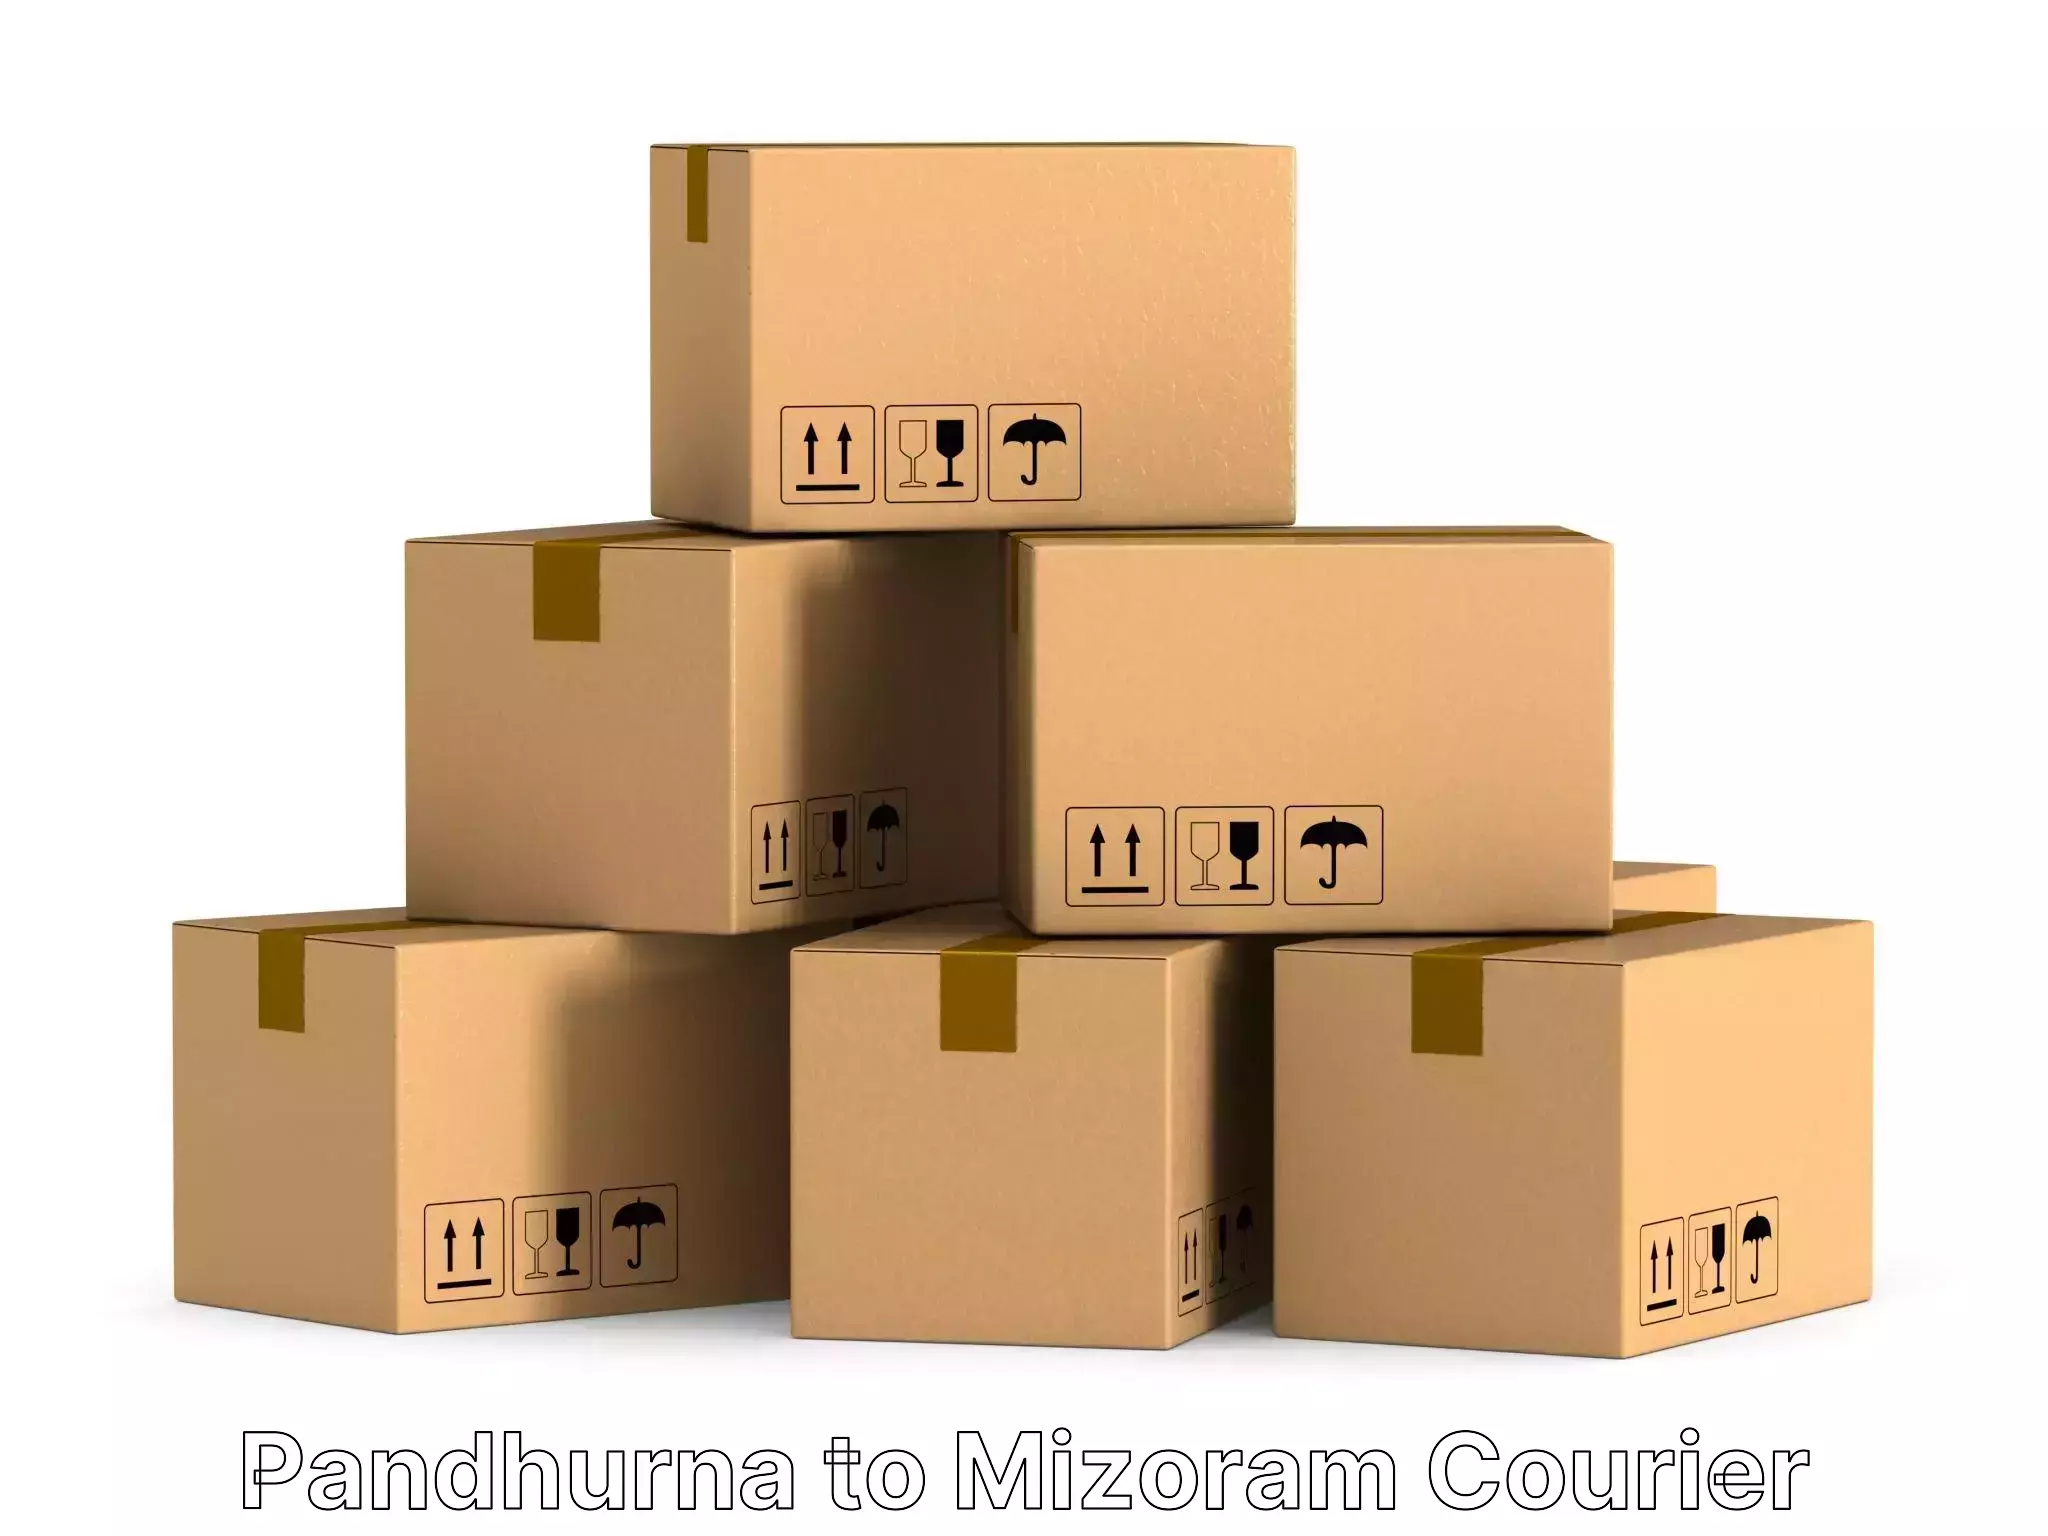 Customized relocation services in Pandhurna to Aizawl